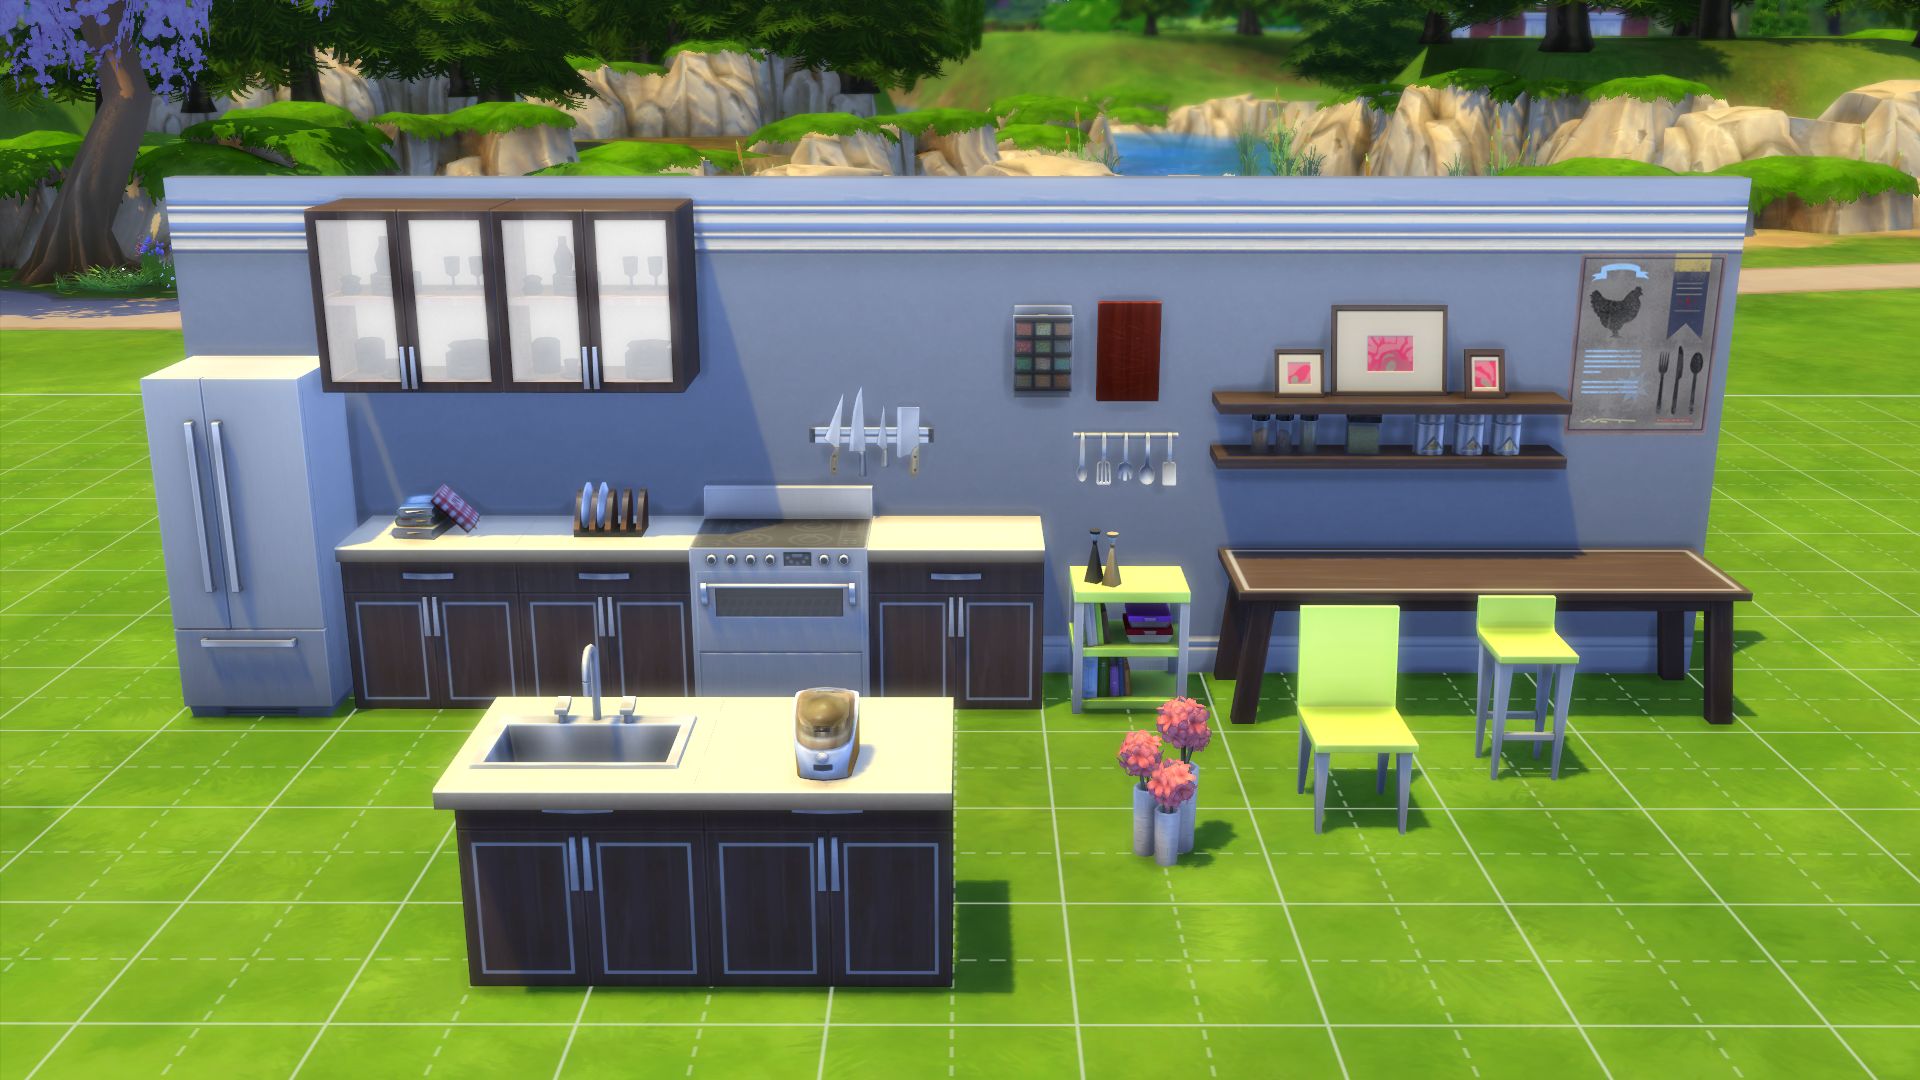 https://www.carls-sims-4-guide.com/gamepictures/stuffpacks/coolkitchen/large/Objects.jpg